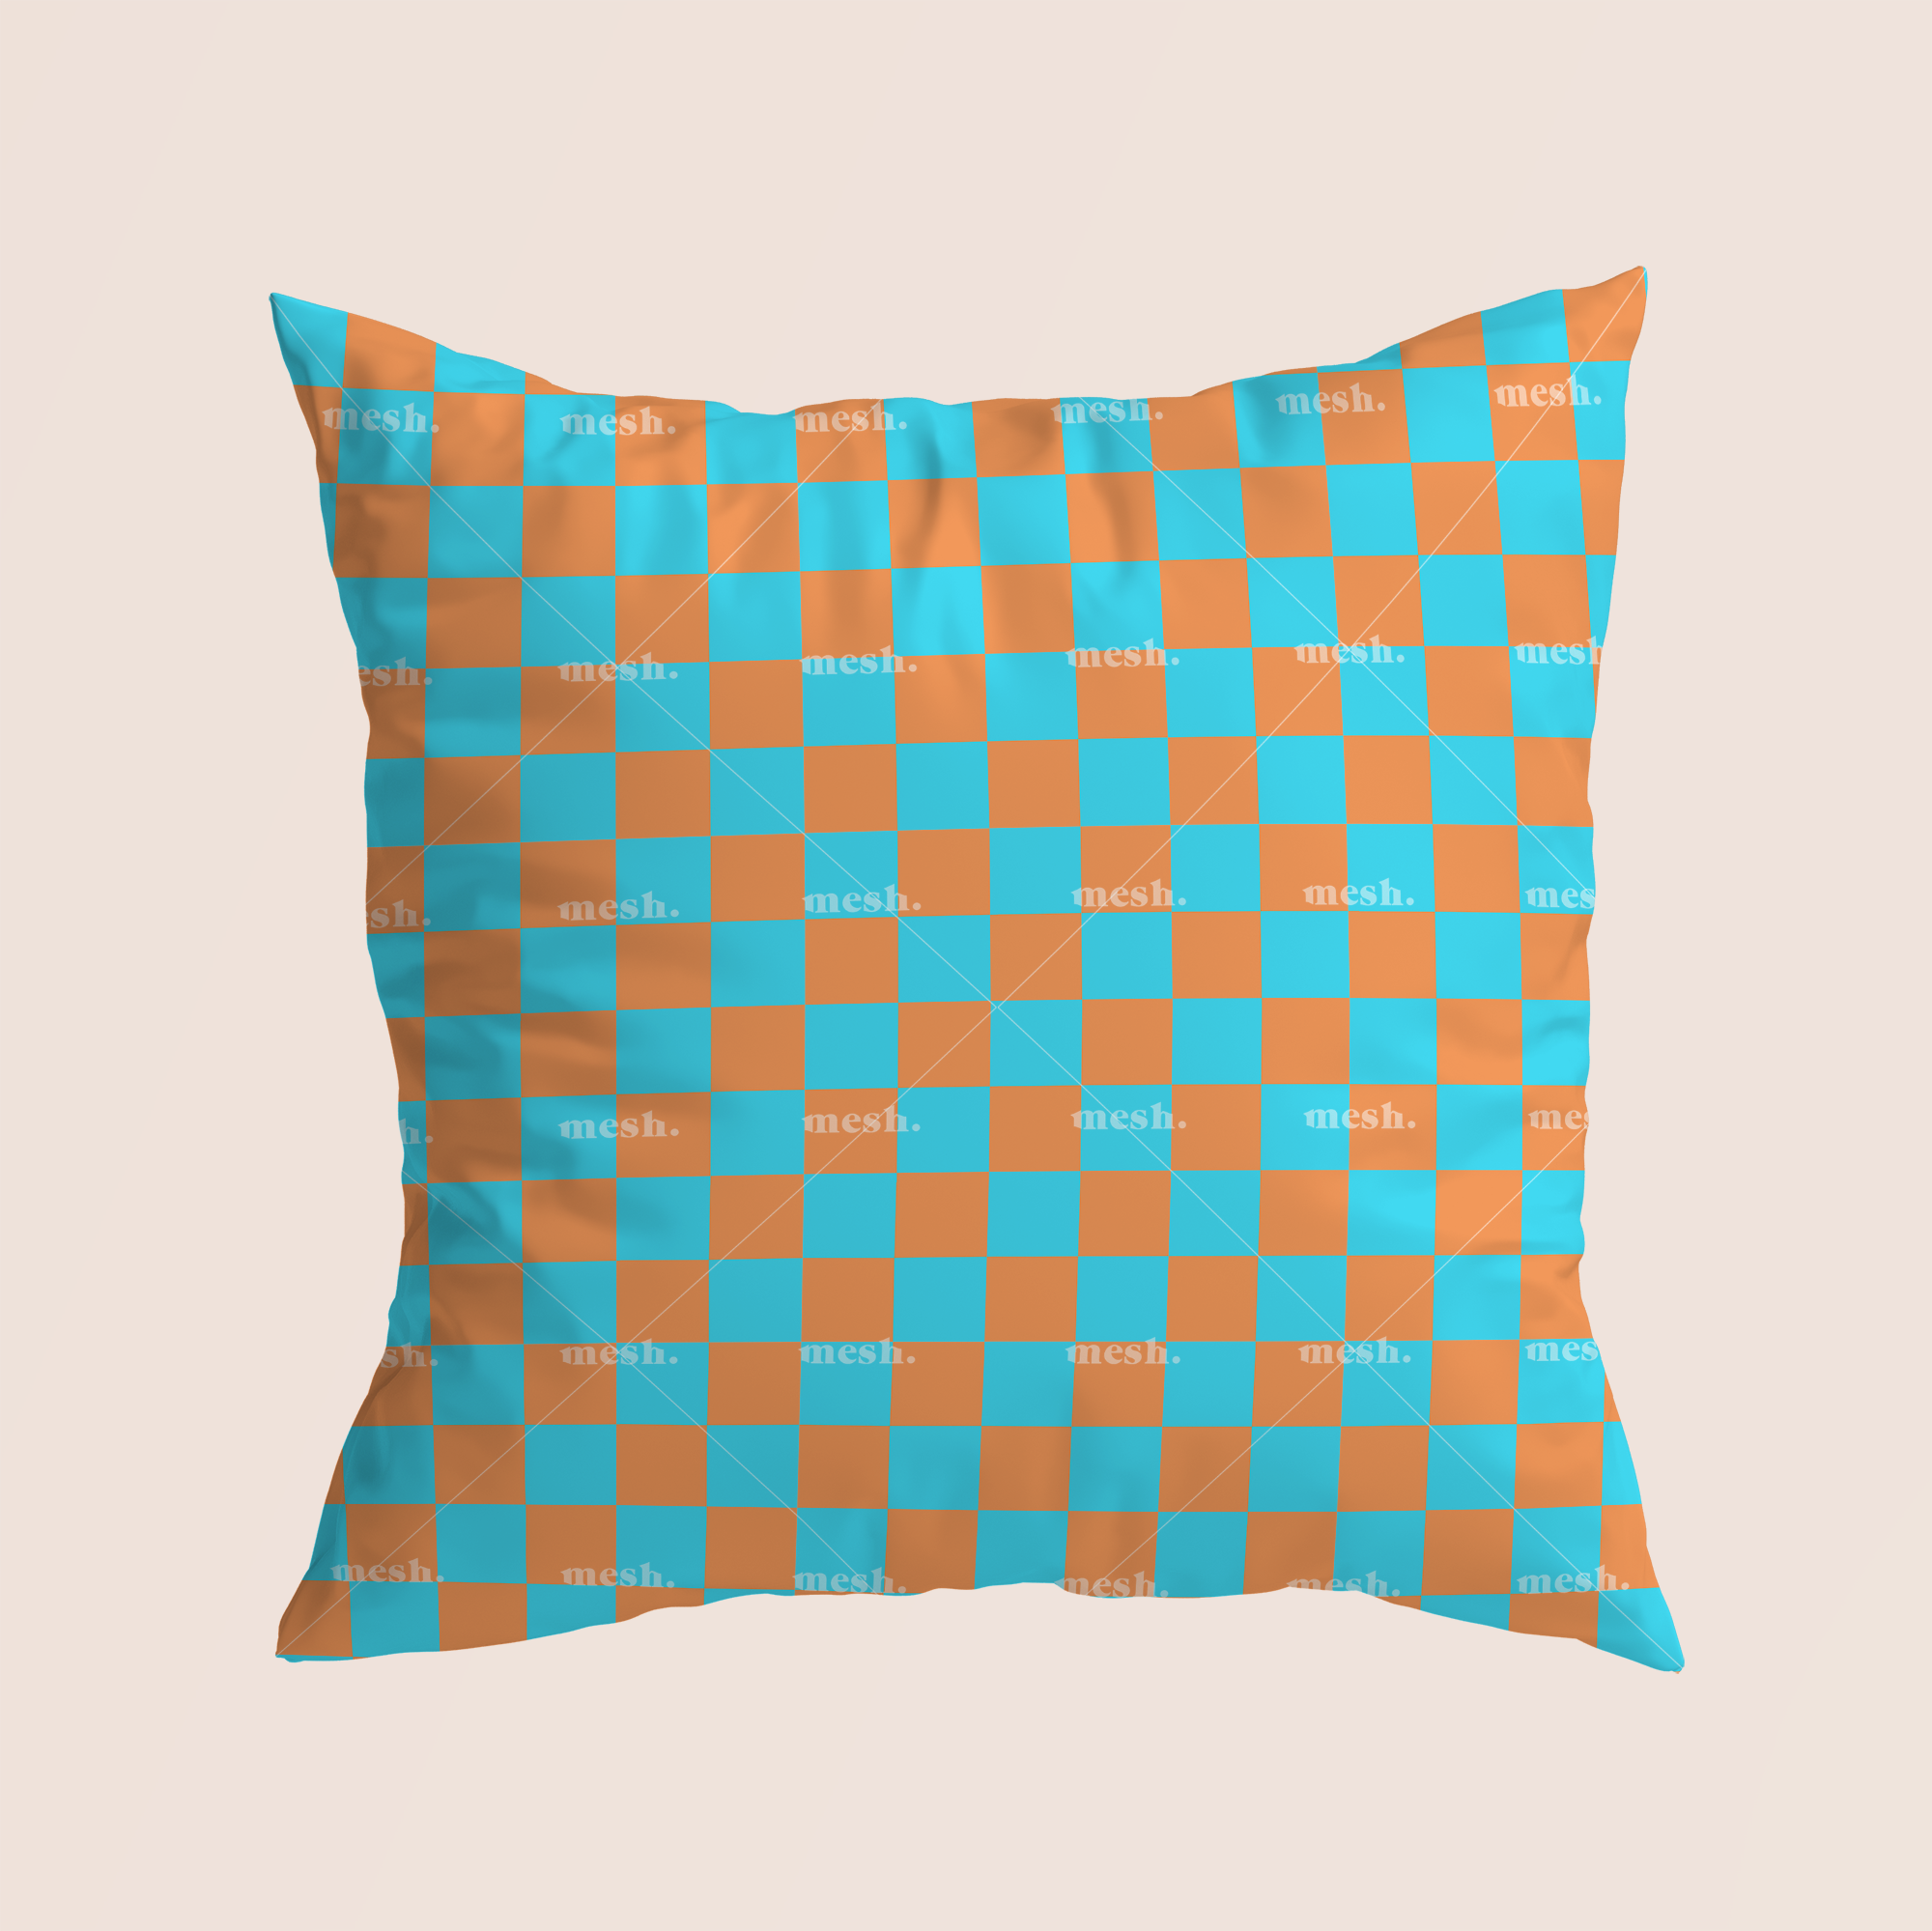 Chess mood in orange and blue pattern design printed on recycled fabric pillow mockup